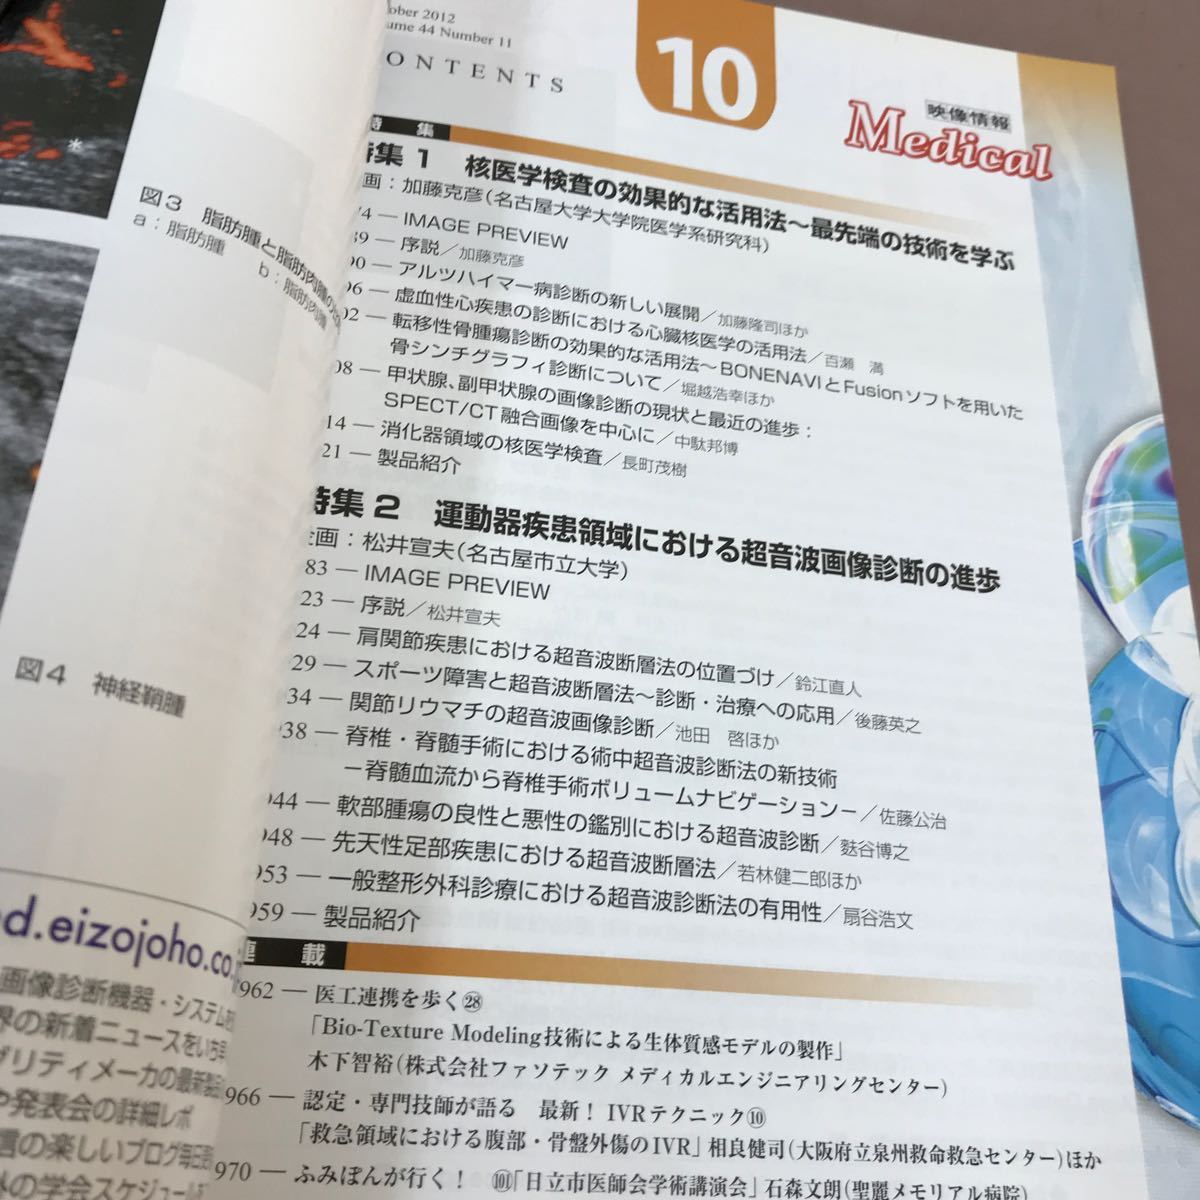 D01-075 映像情報Medical 2012.10 Vol.44 No.11 核医学検査の効果的な活用法〜最先端の技術を学ぶ 他 産業開発機構株式会社_画像3